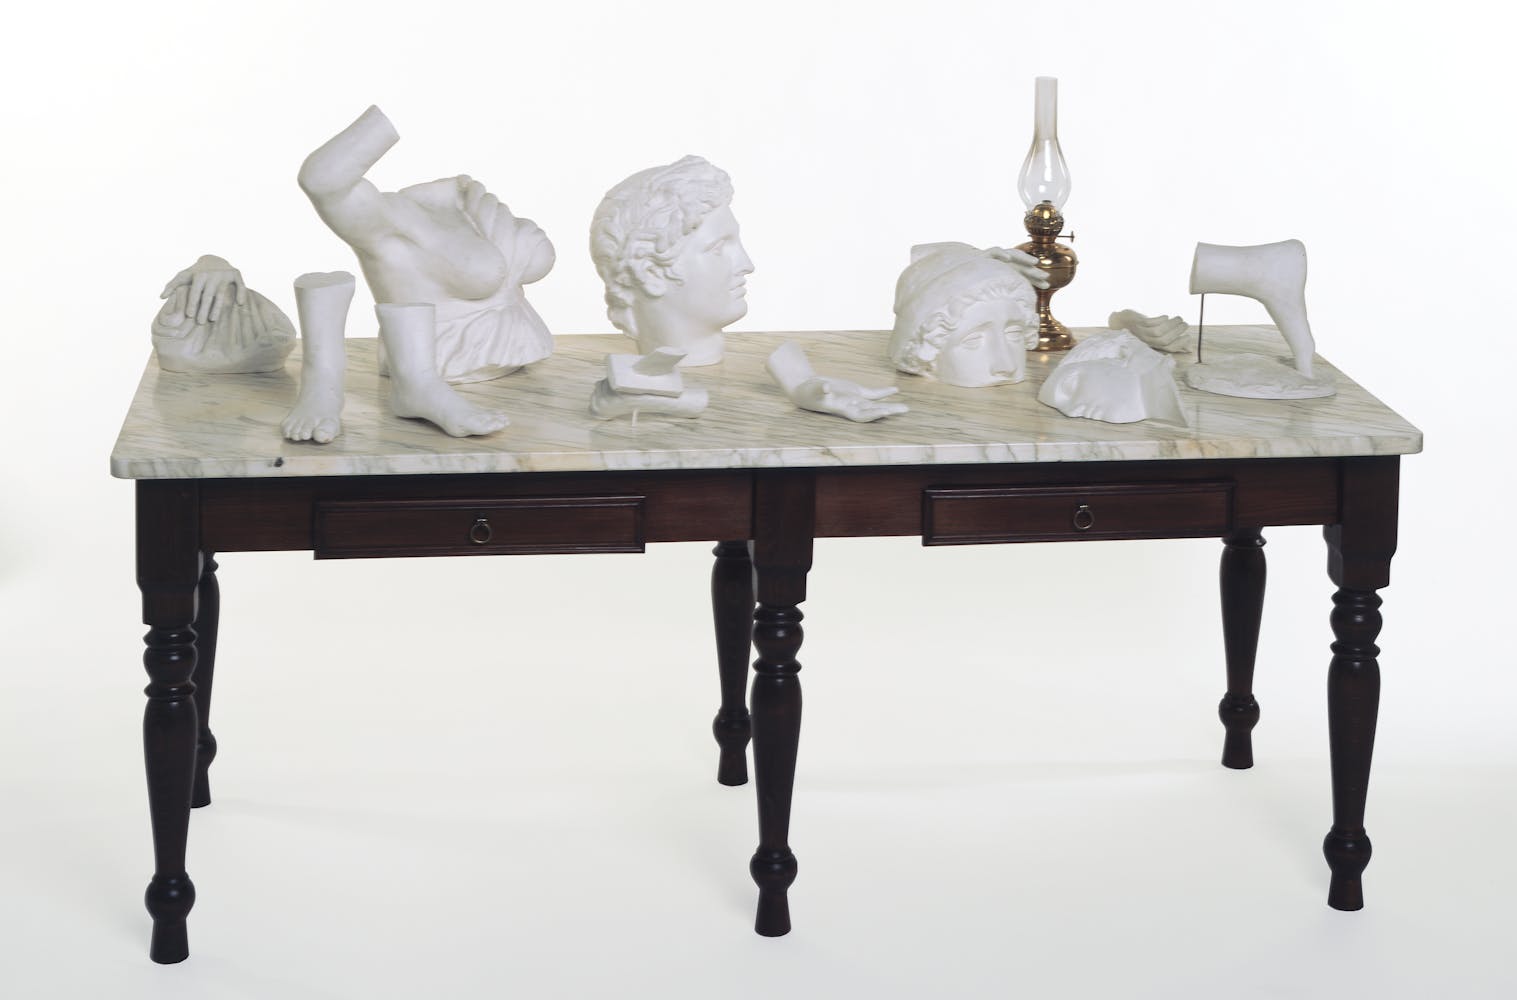 Ornate table with a variety of sculpture objects on top including a white head and lamp